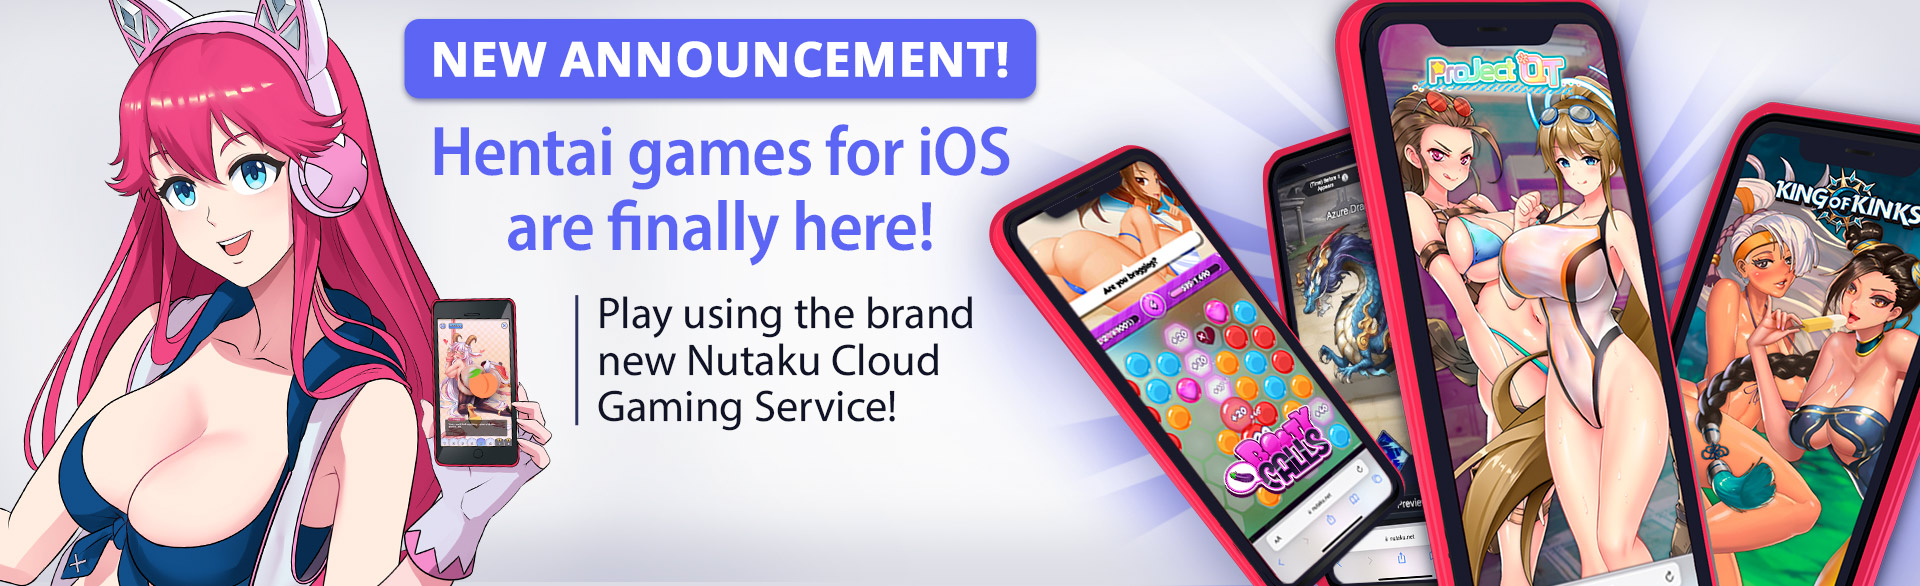 Hentai Games for iOS Are Finally Here!